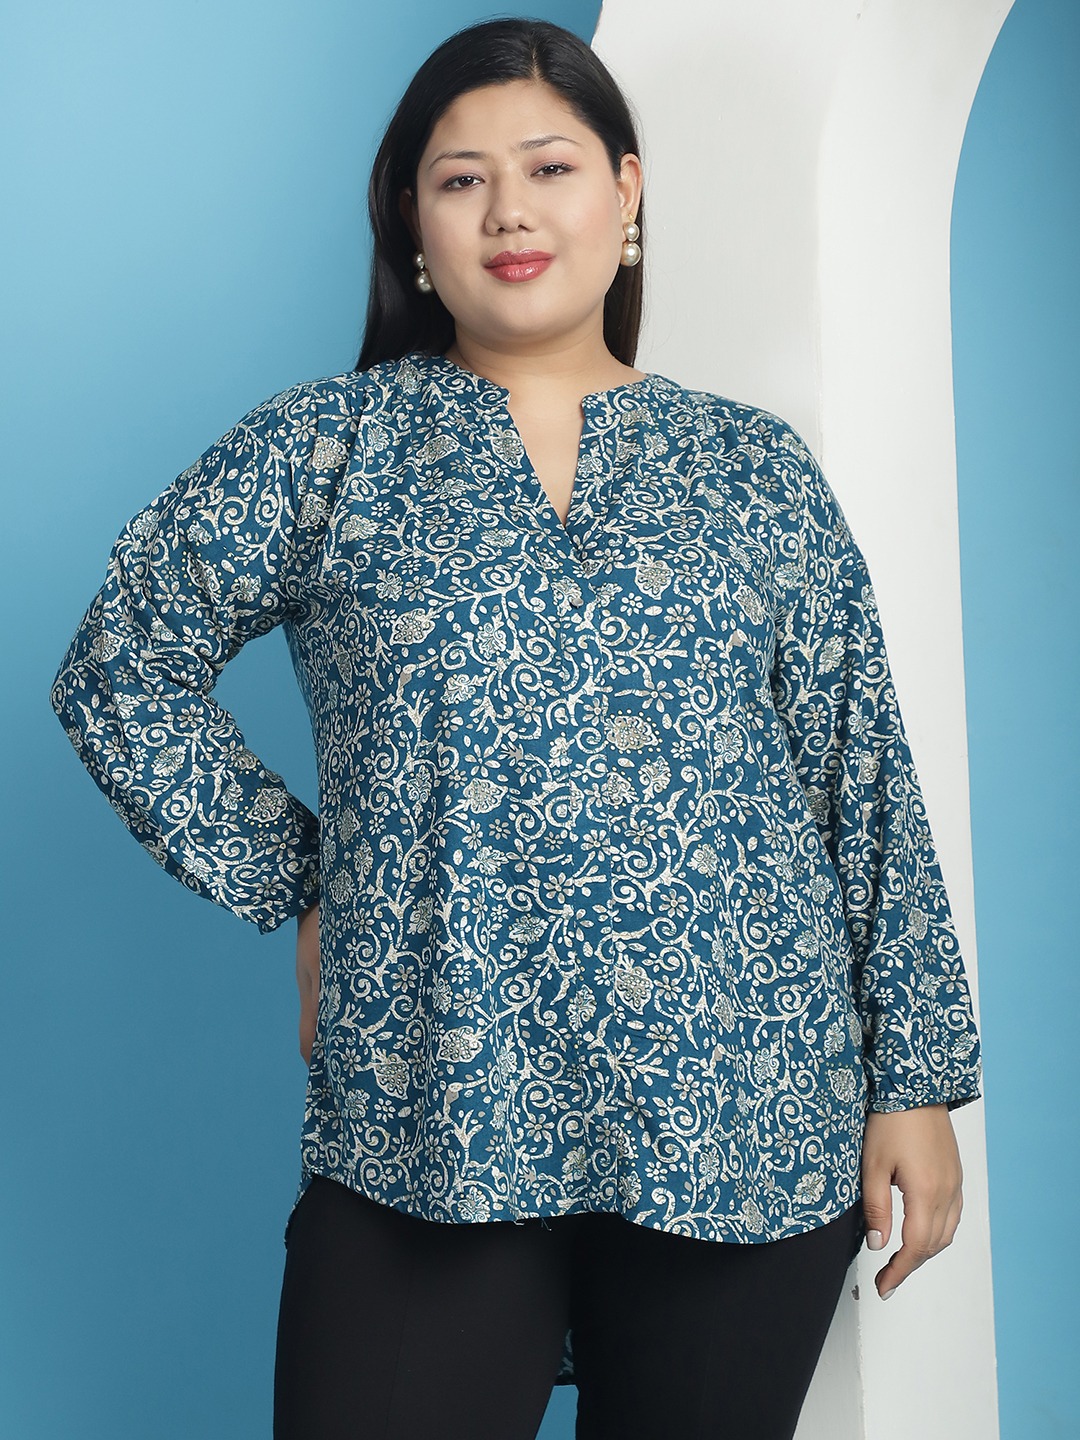 Plus Size Clothing Store  Buy Women XL To 6XL Clothing Online